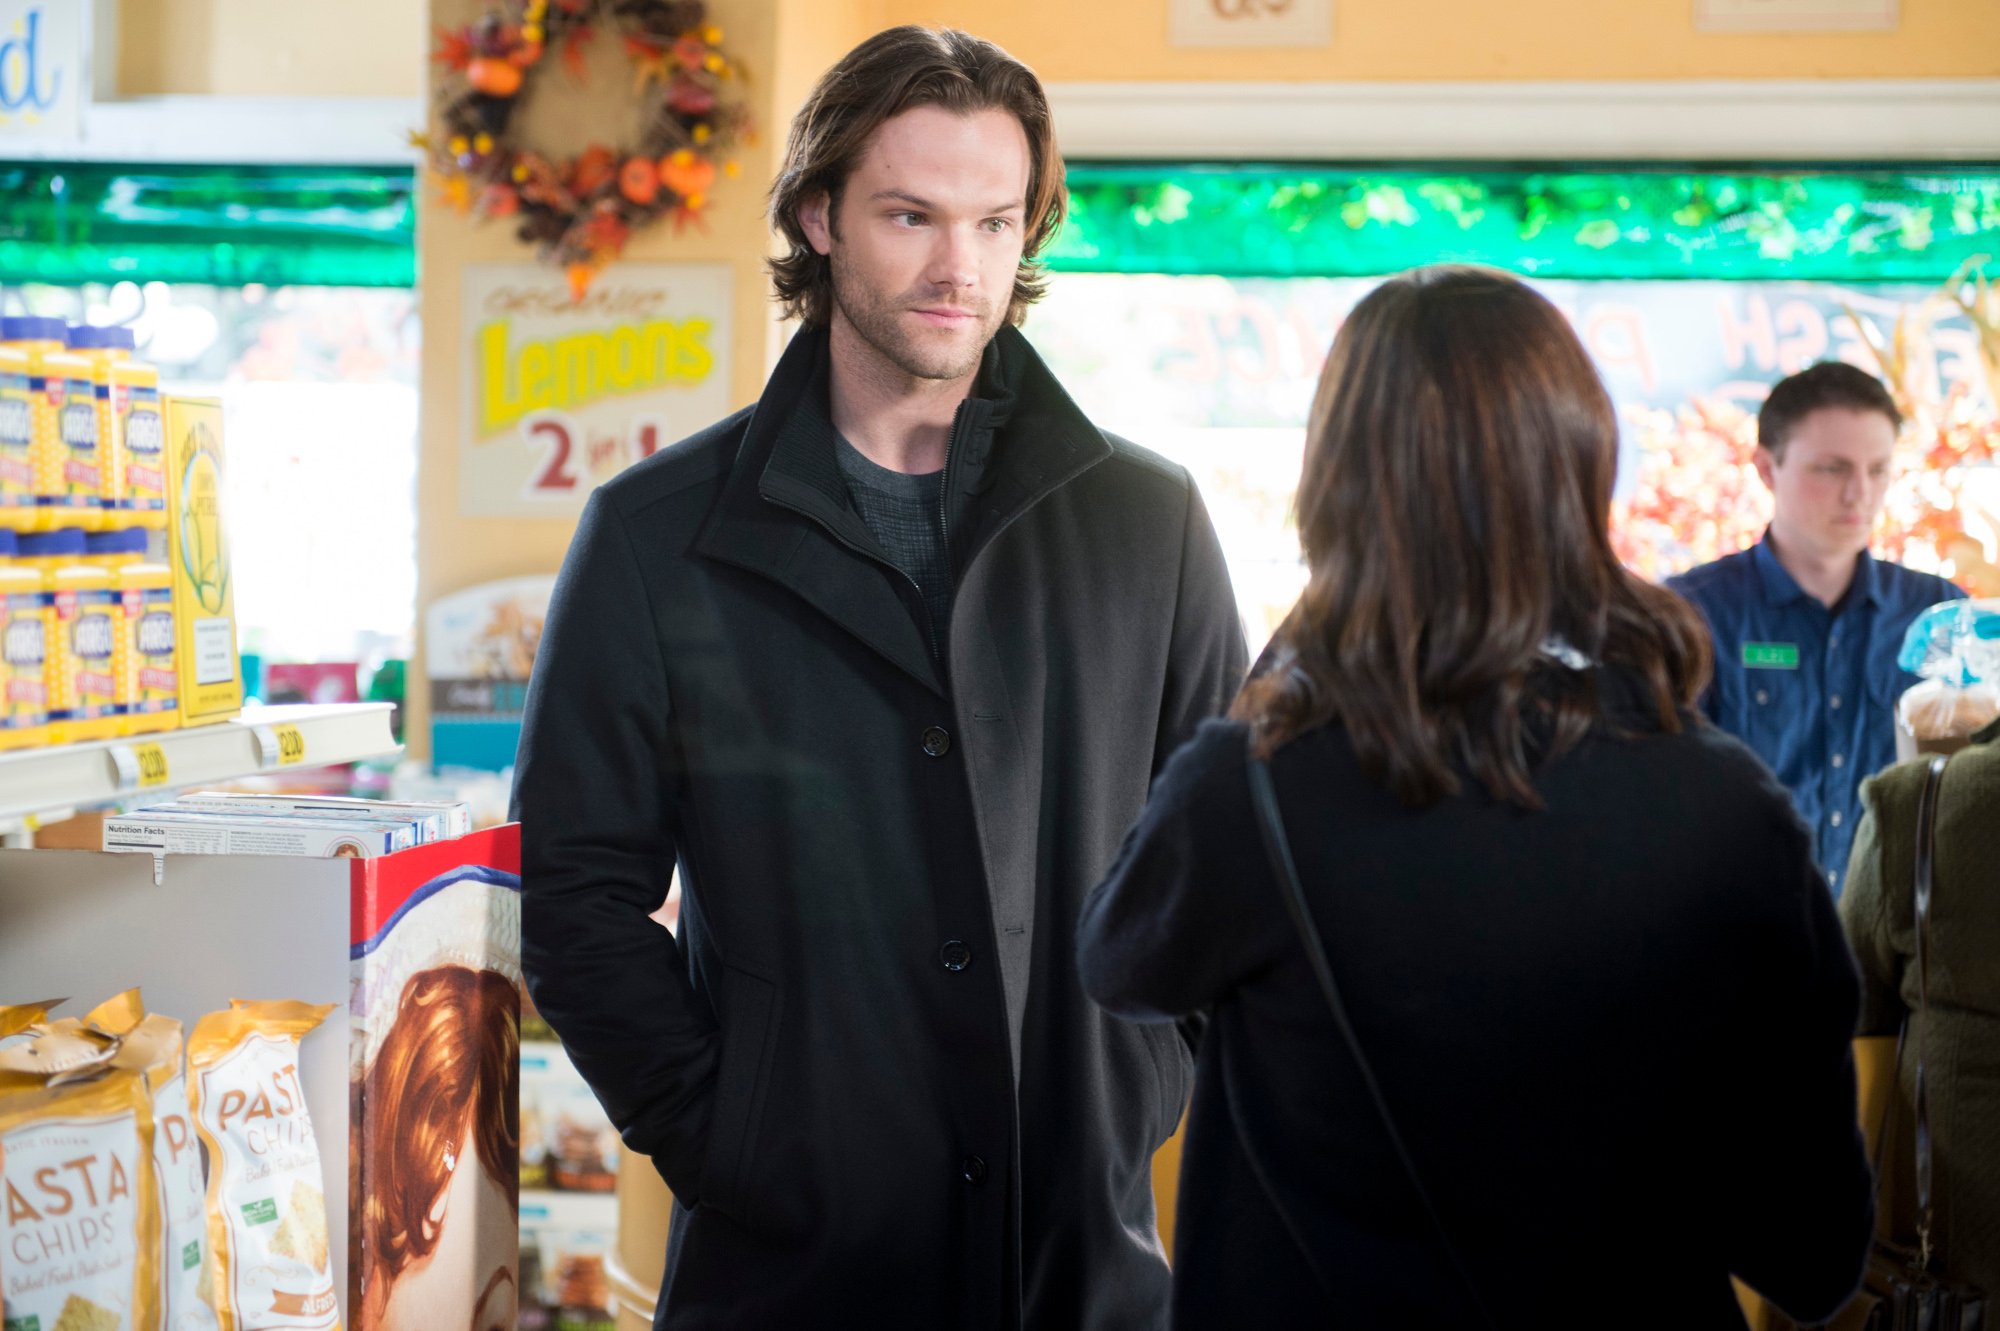 Dean Forrester and Rory Gilmore remeet in Stars Hollow as adults.